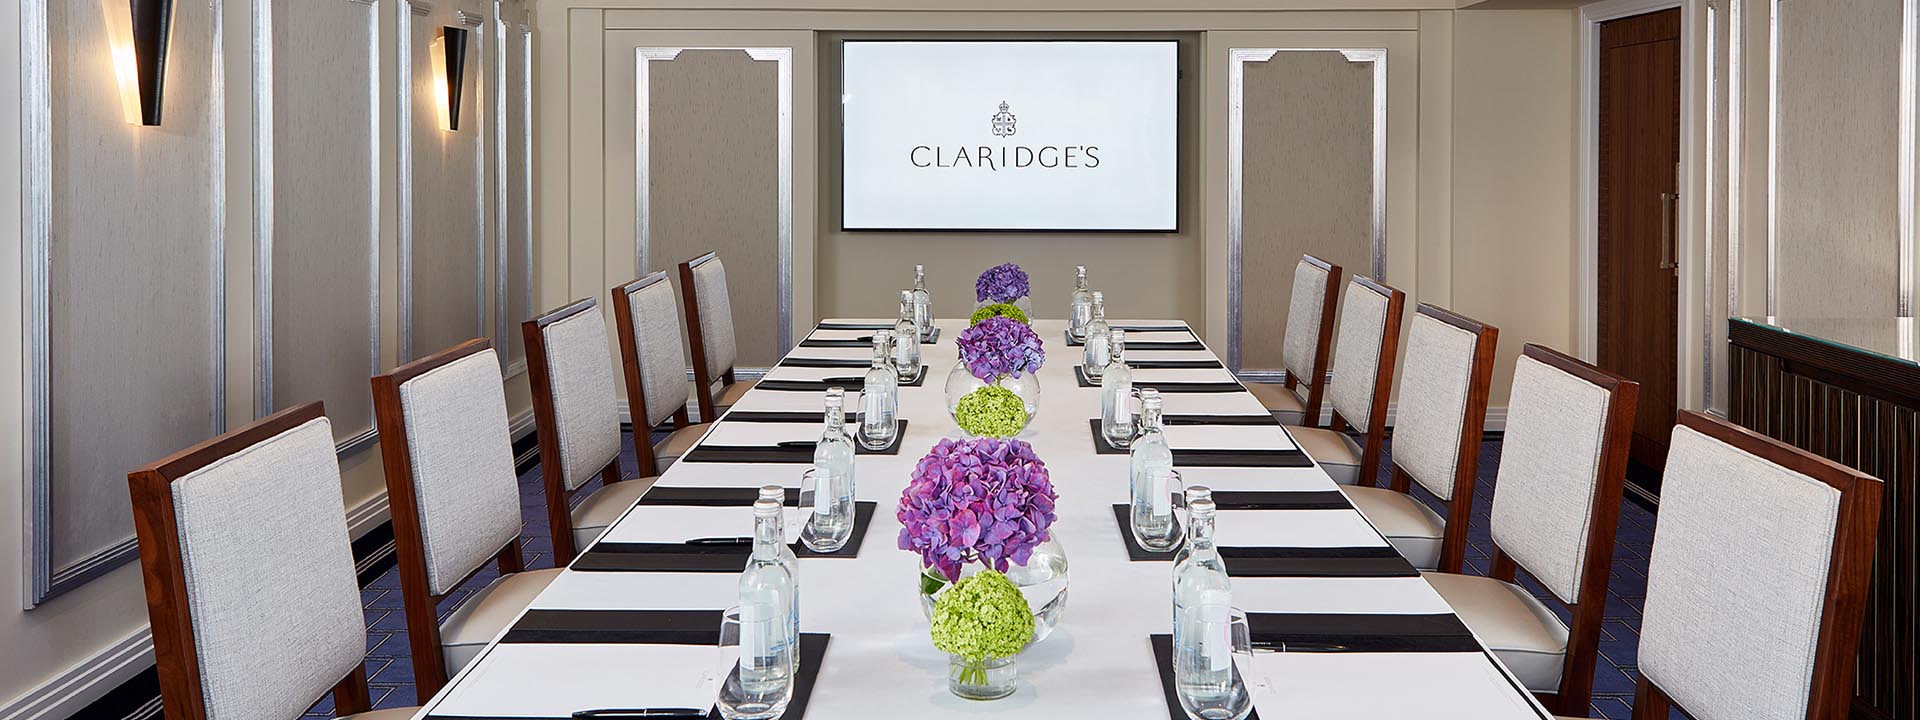 A view of the table set with floral arrangements, for a business meeting, in the Windsor Room.